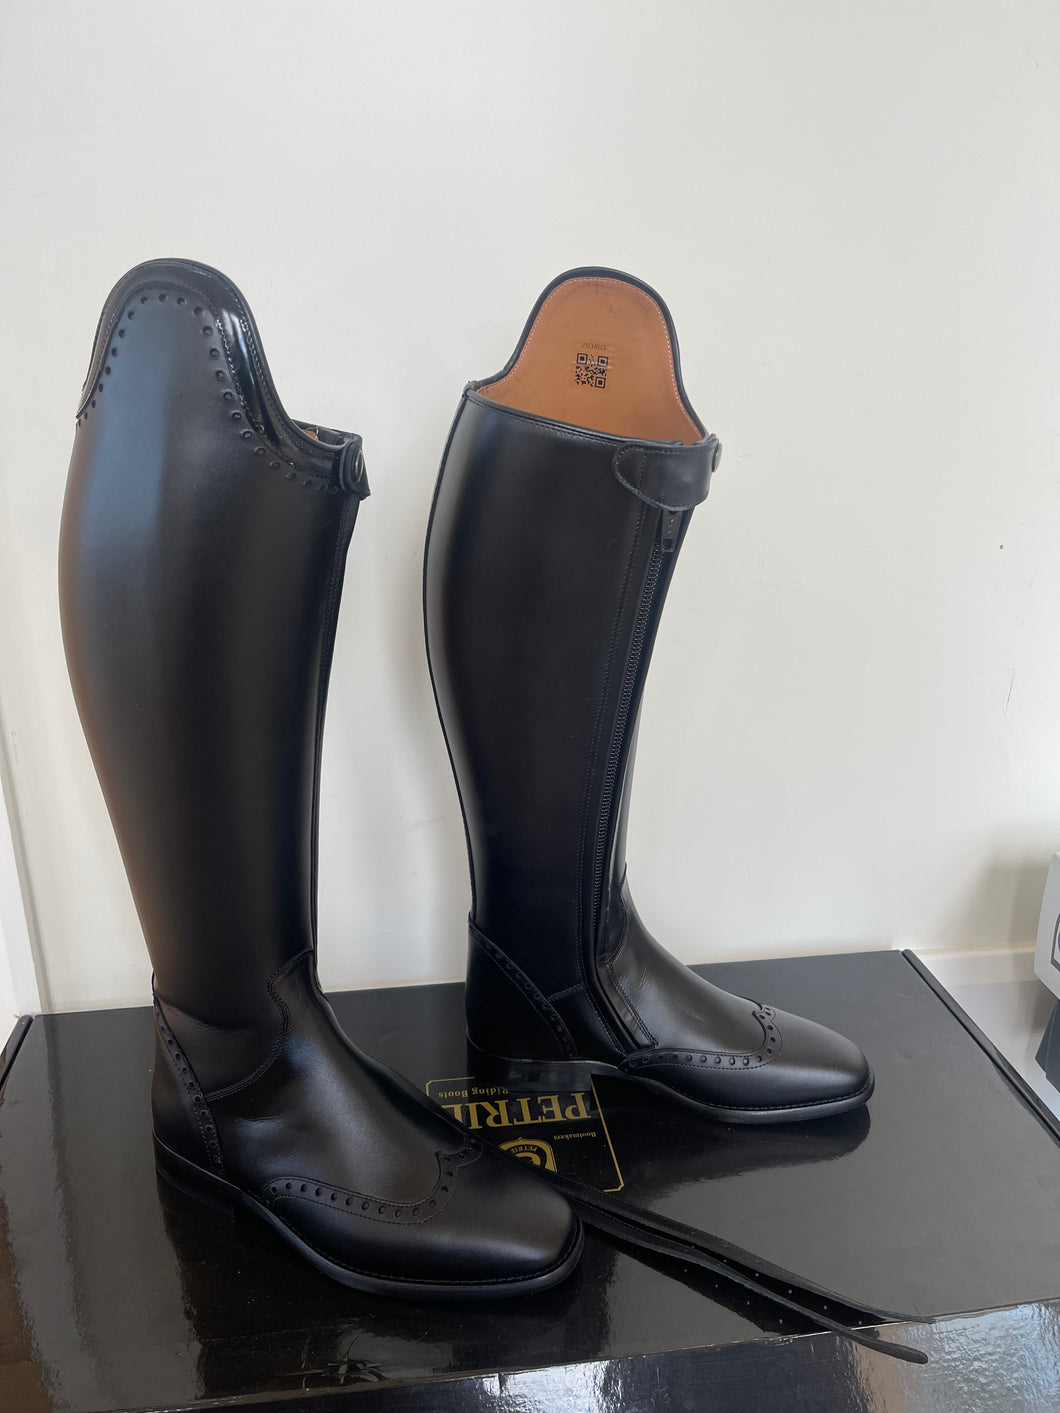 Petrie significant boots - Dressage boots